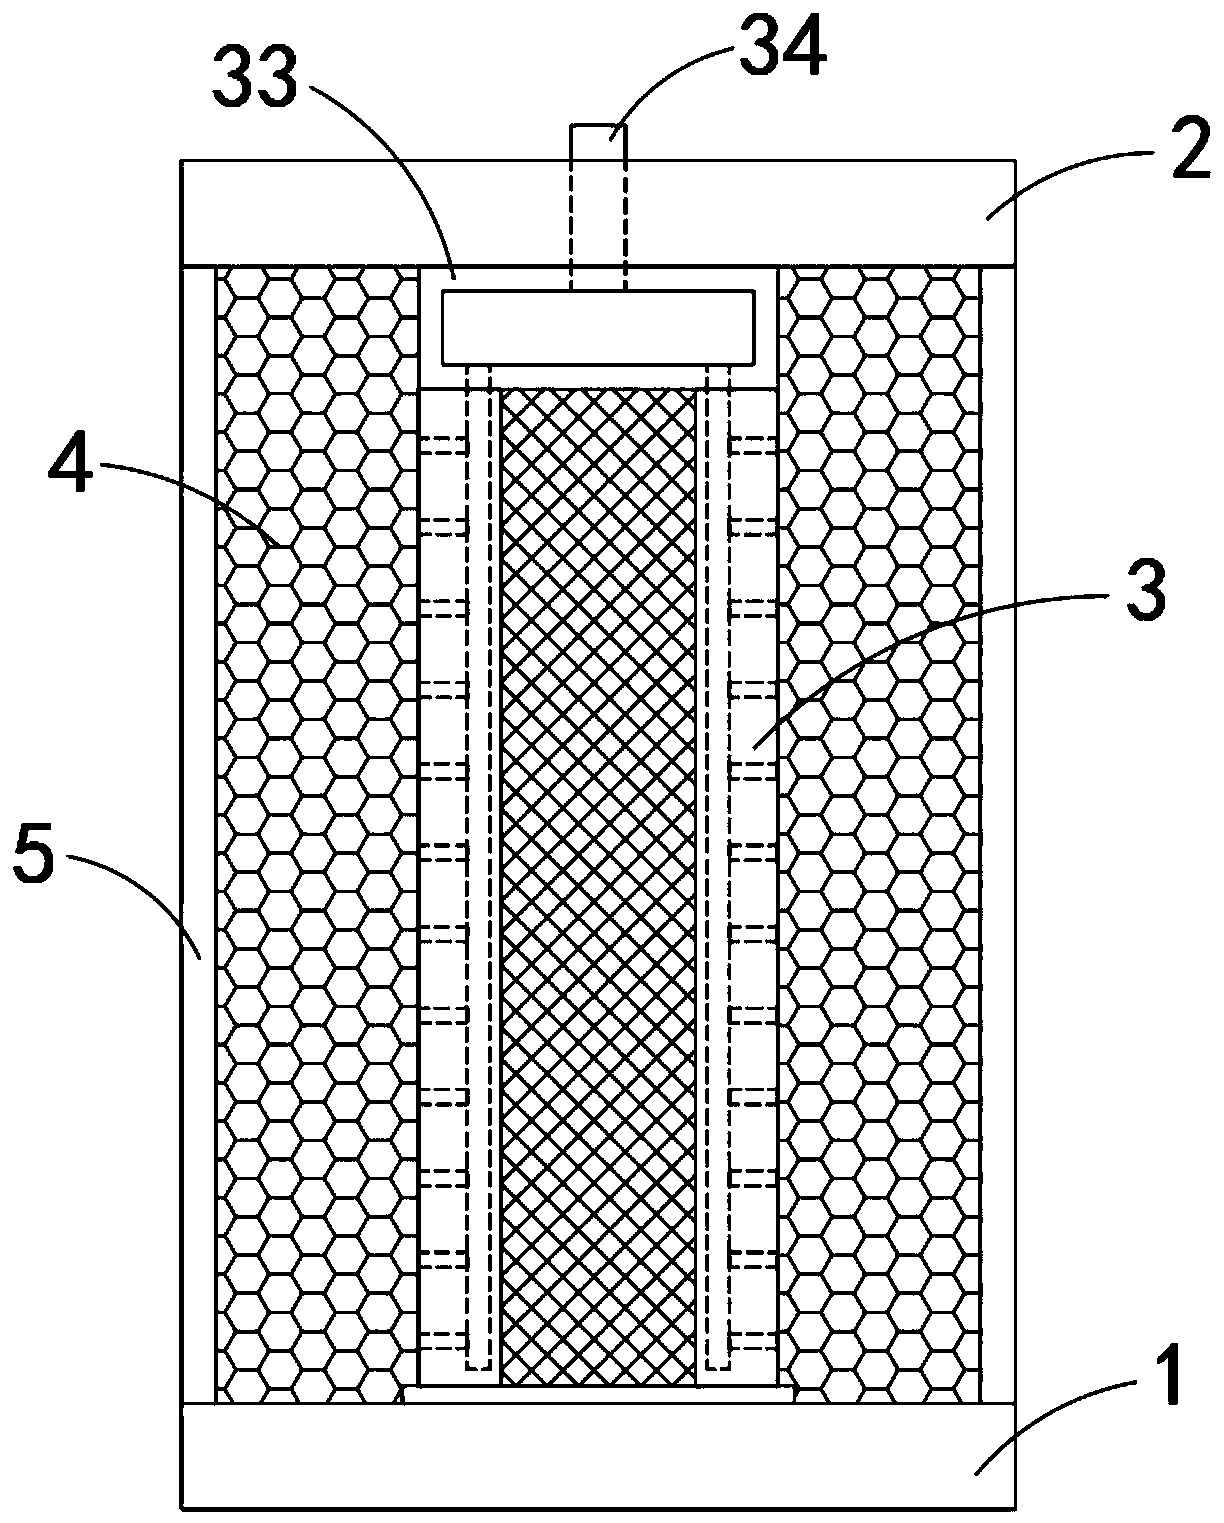 Self-rotating detachable easy-to-clean filter element